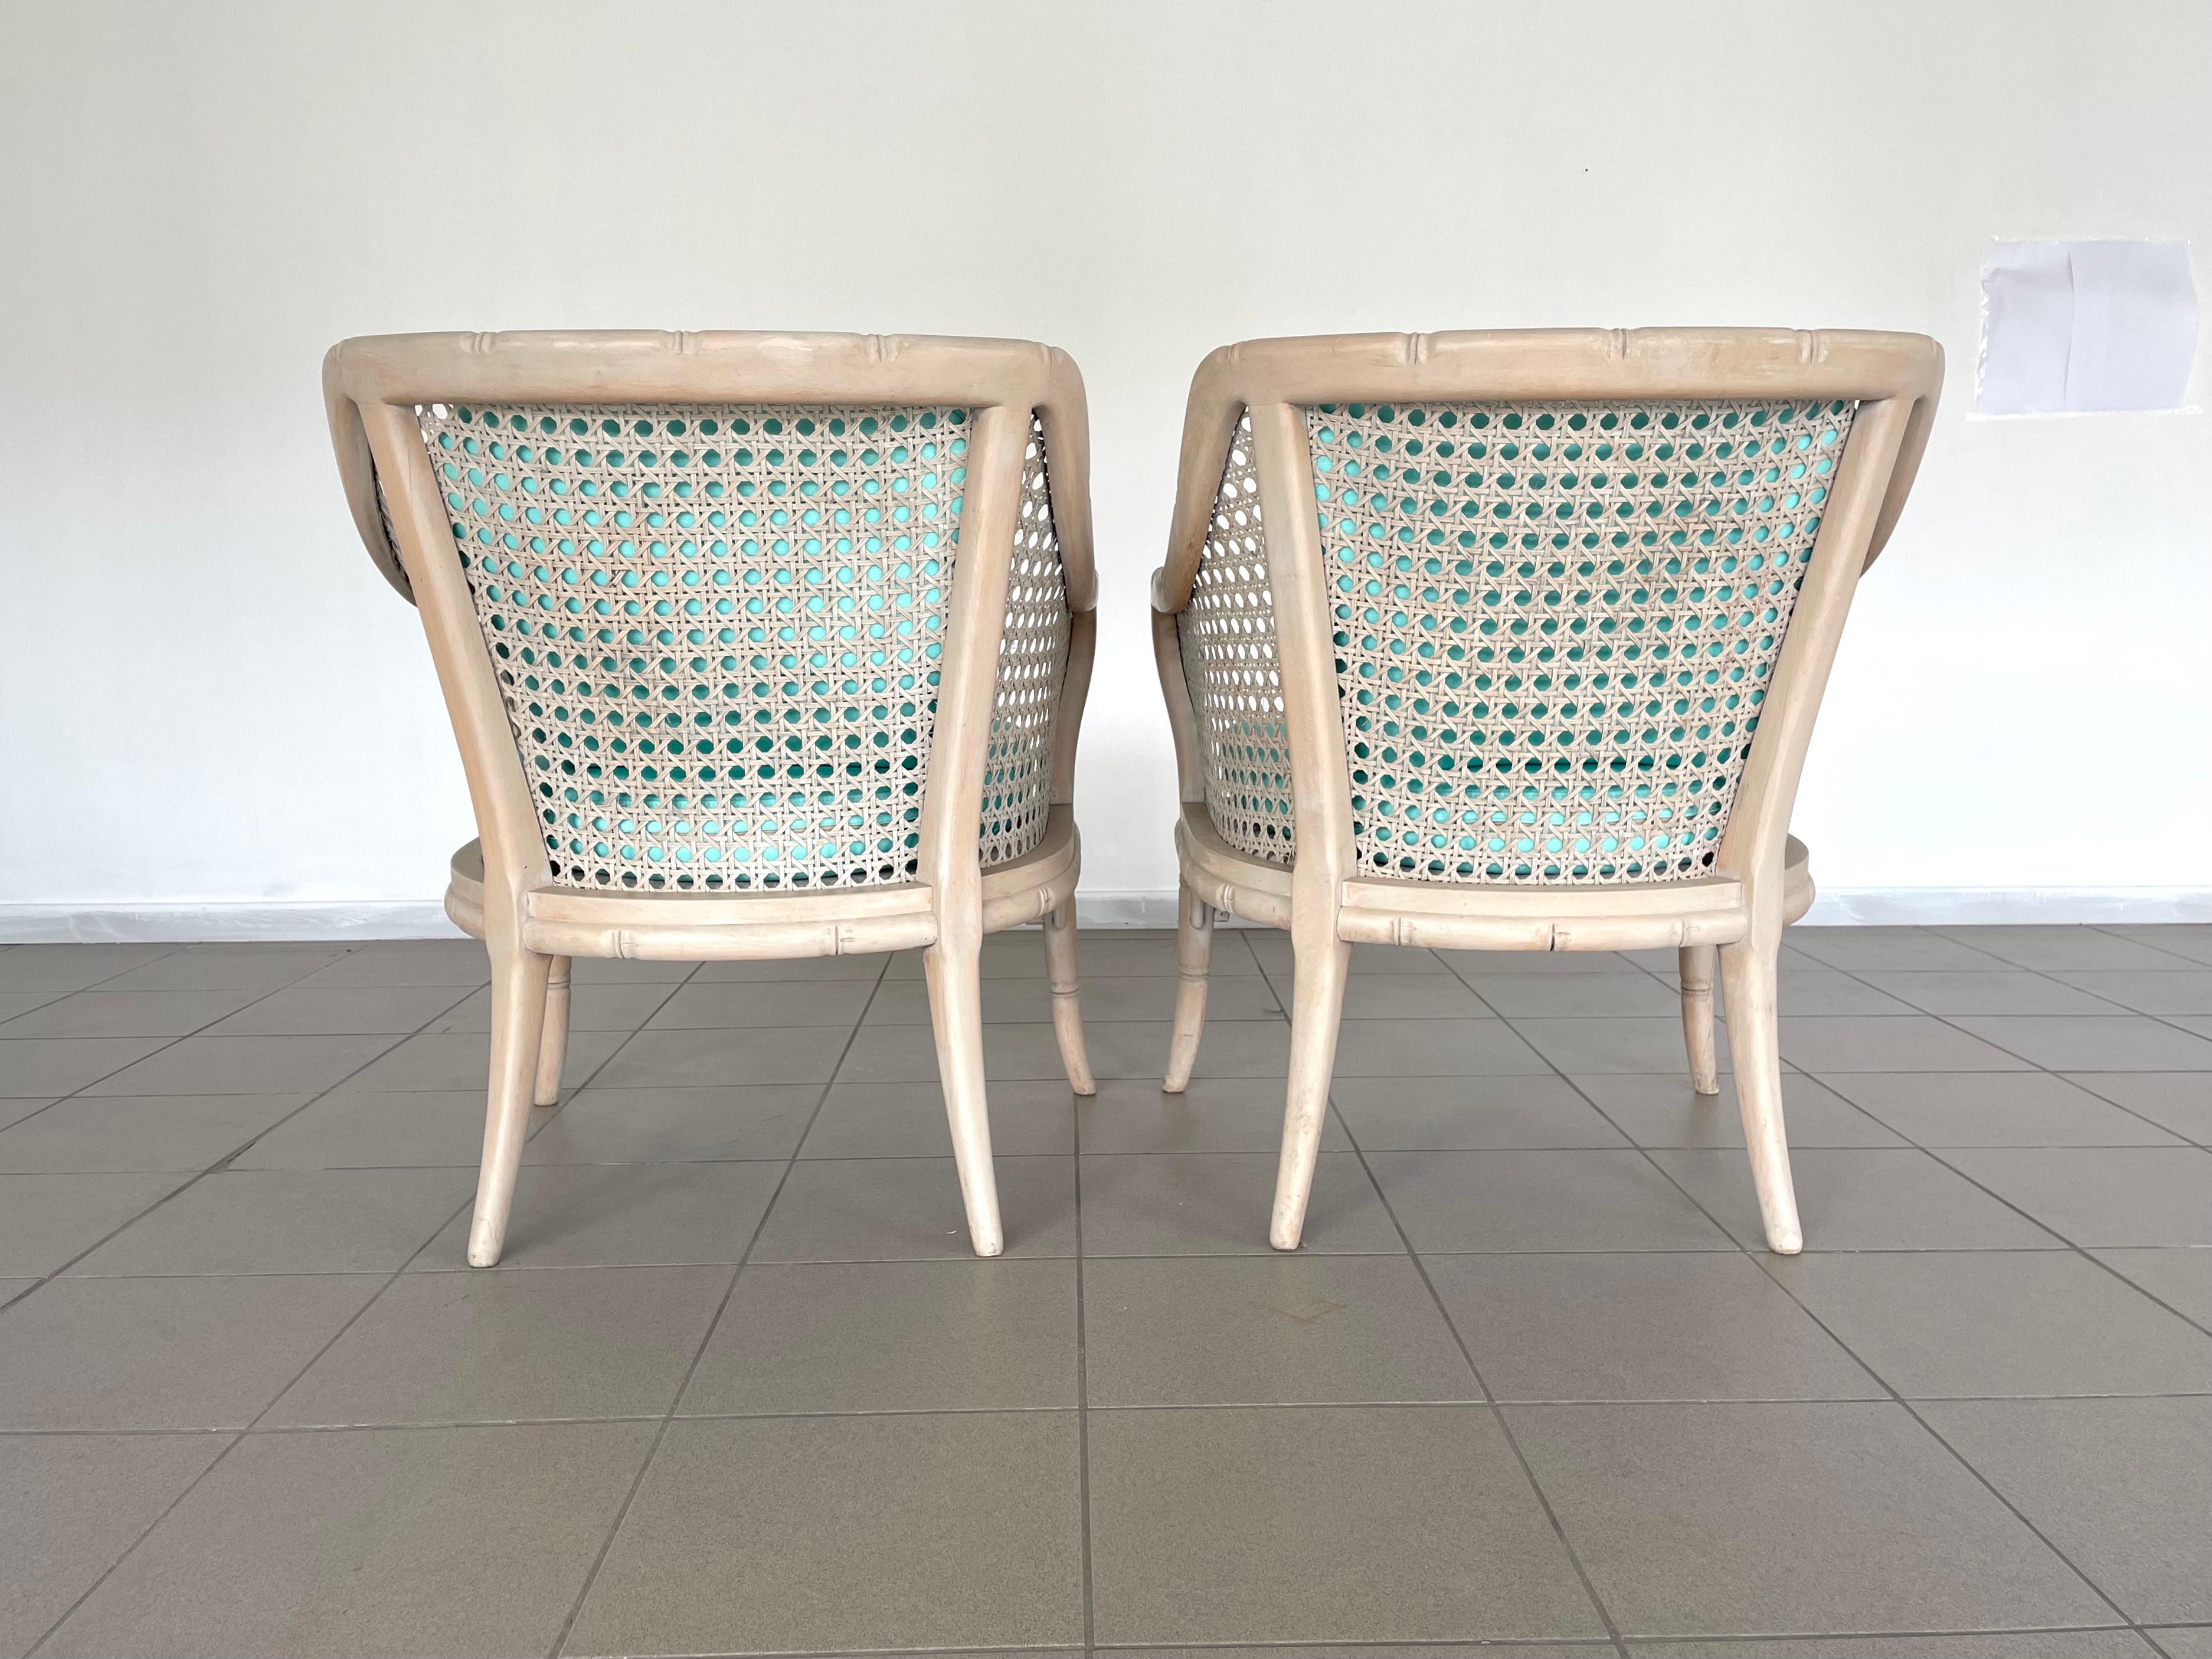 Mid-20th Century Mid-Century Modern French Riviera Cane Bamboo Armchairs 1960s, Newly Upholstered